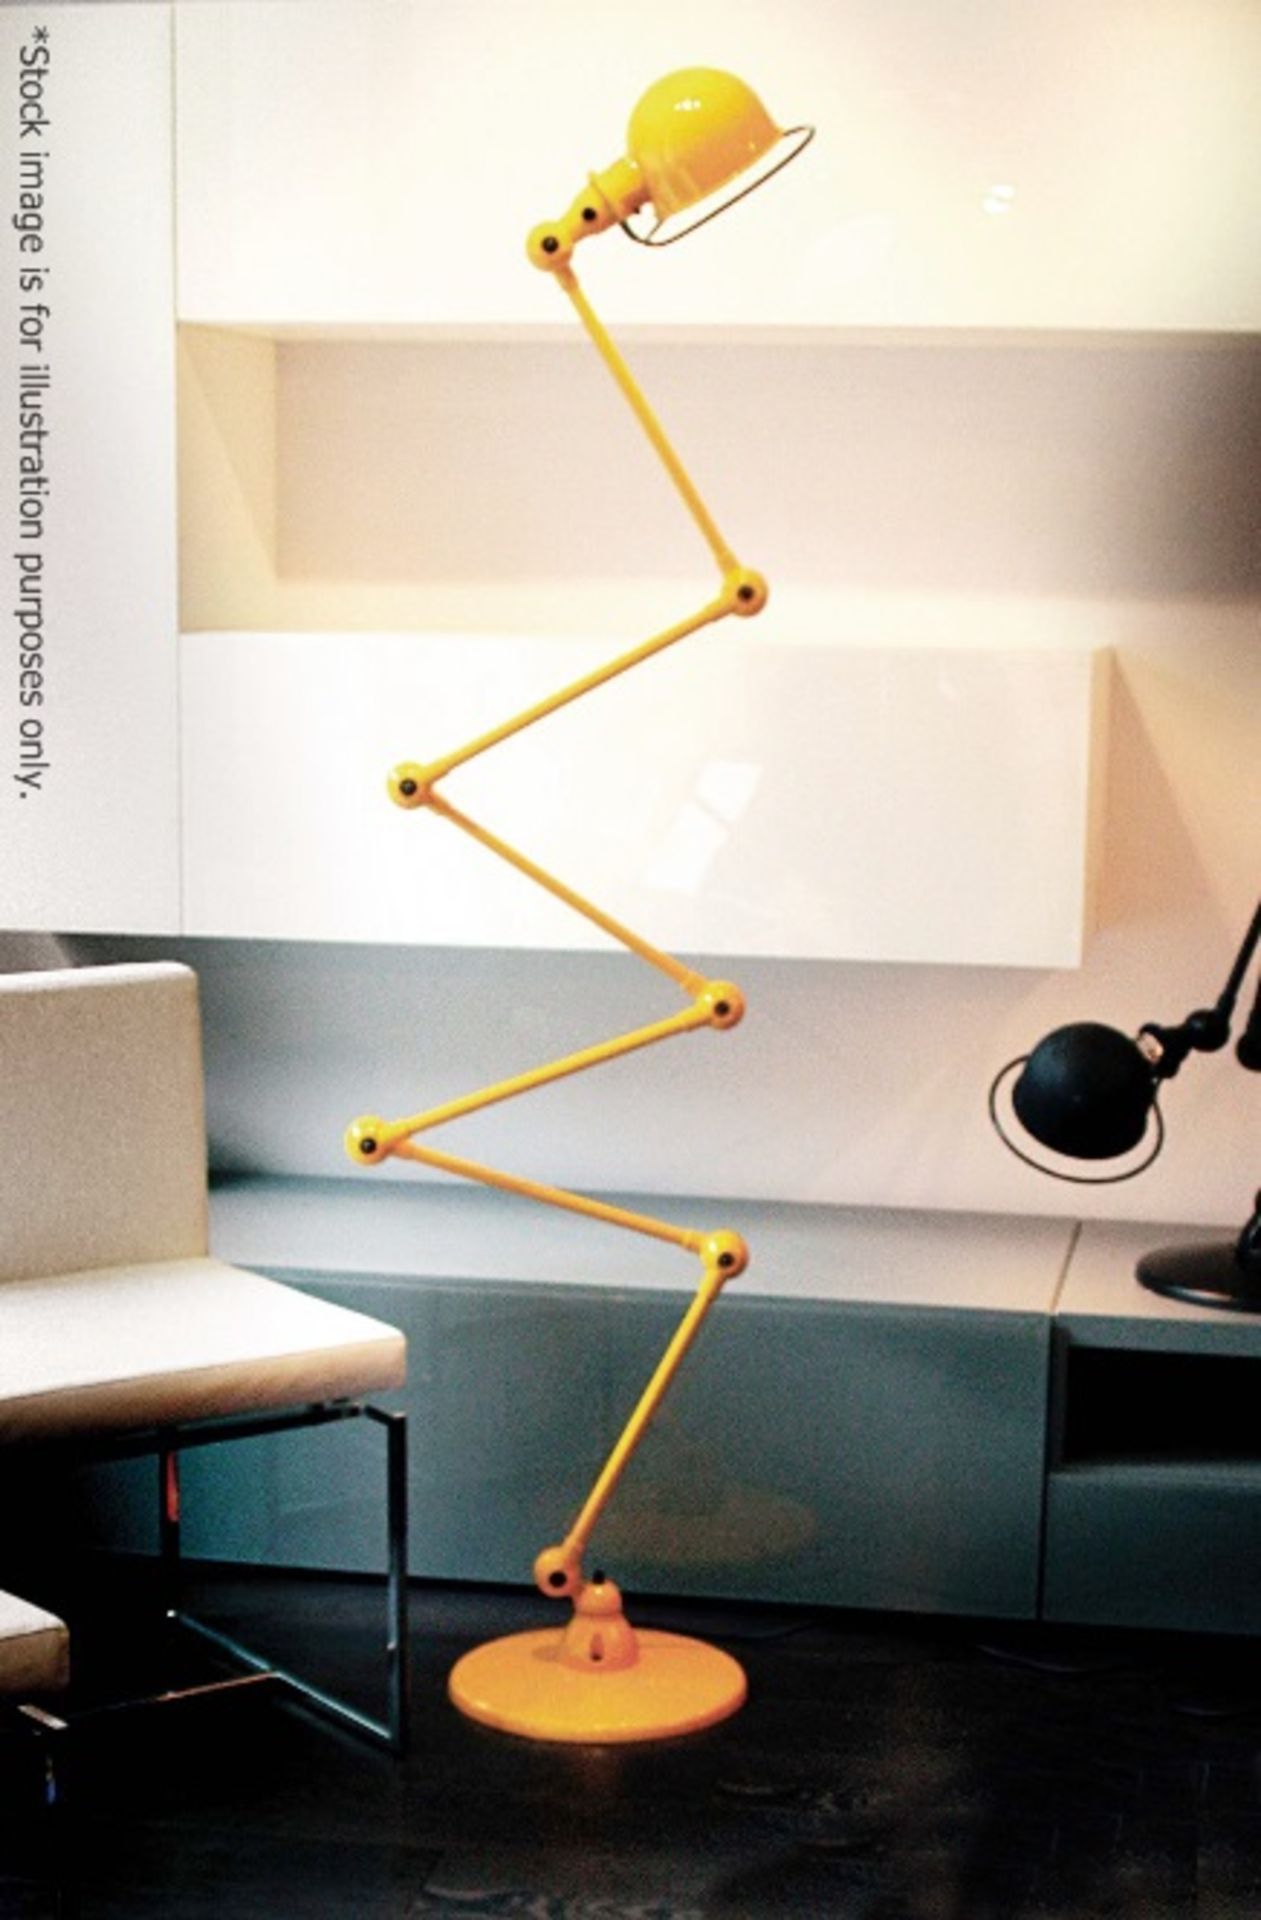 1 x Jean Louis Domecq Inspired 6-Bar ZIG-ZAG Industrial-style Floor Lamp In Bright Yellow - New - Image 2 of 2